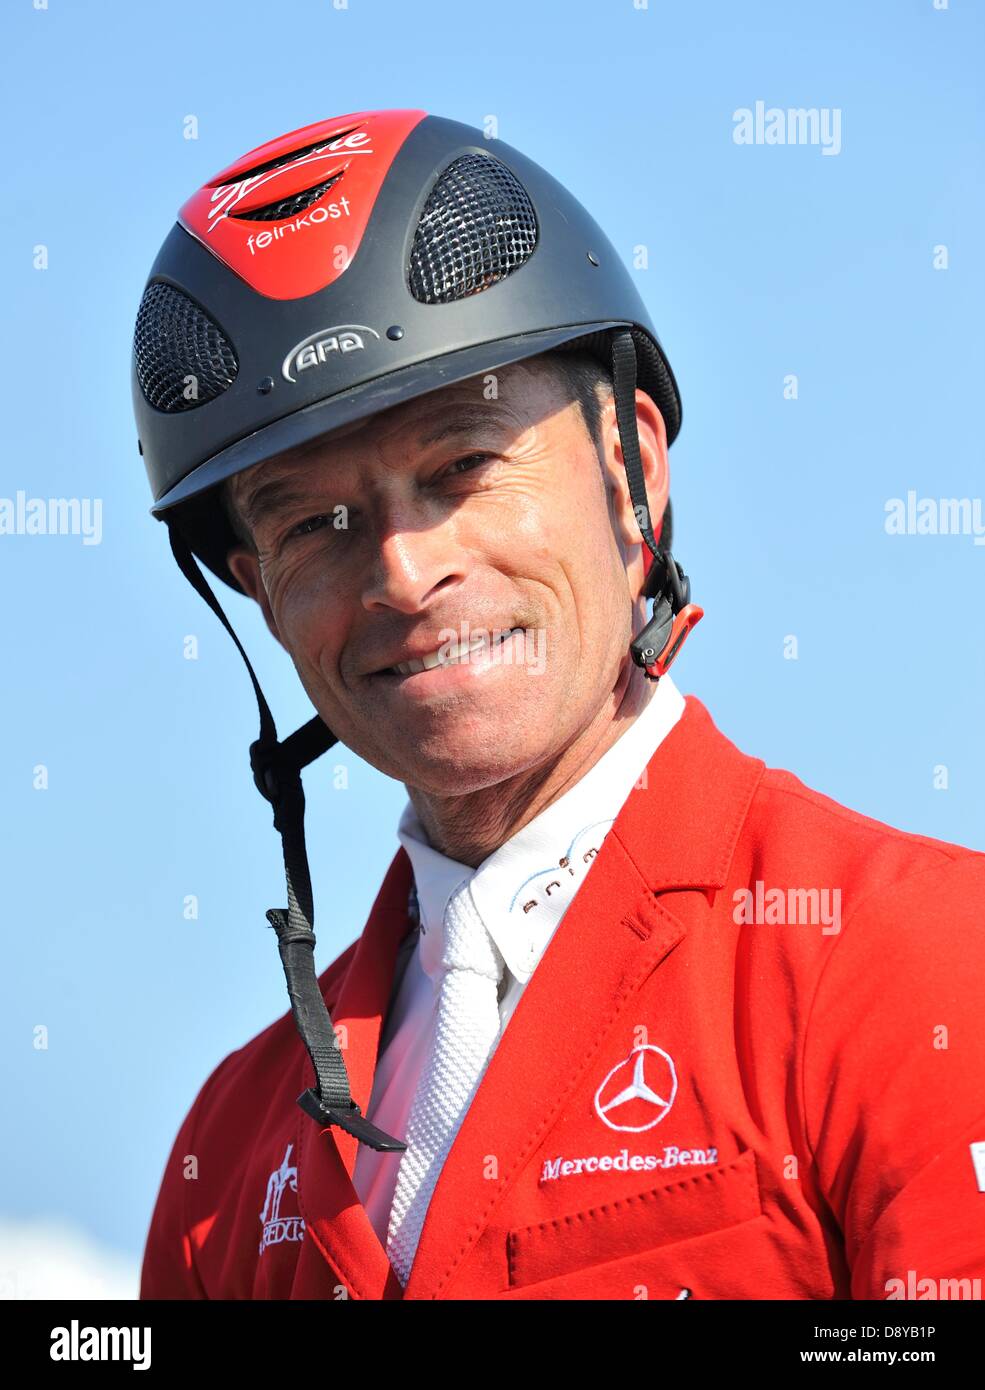 London, UK. 6th June, 2013. Plus Schwizer [SUI] following his win in the CSI5* competition.   The 2013 Longines Global Champions Tour.  Stephen Bartholomew/Stephen Bartholomew Photography/Alamy Live News Stock Photo